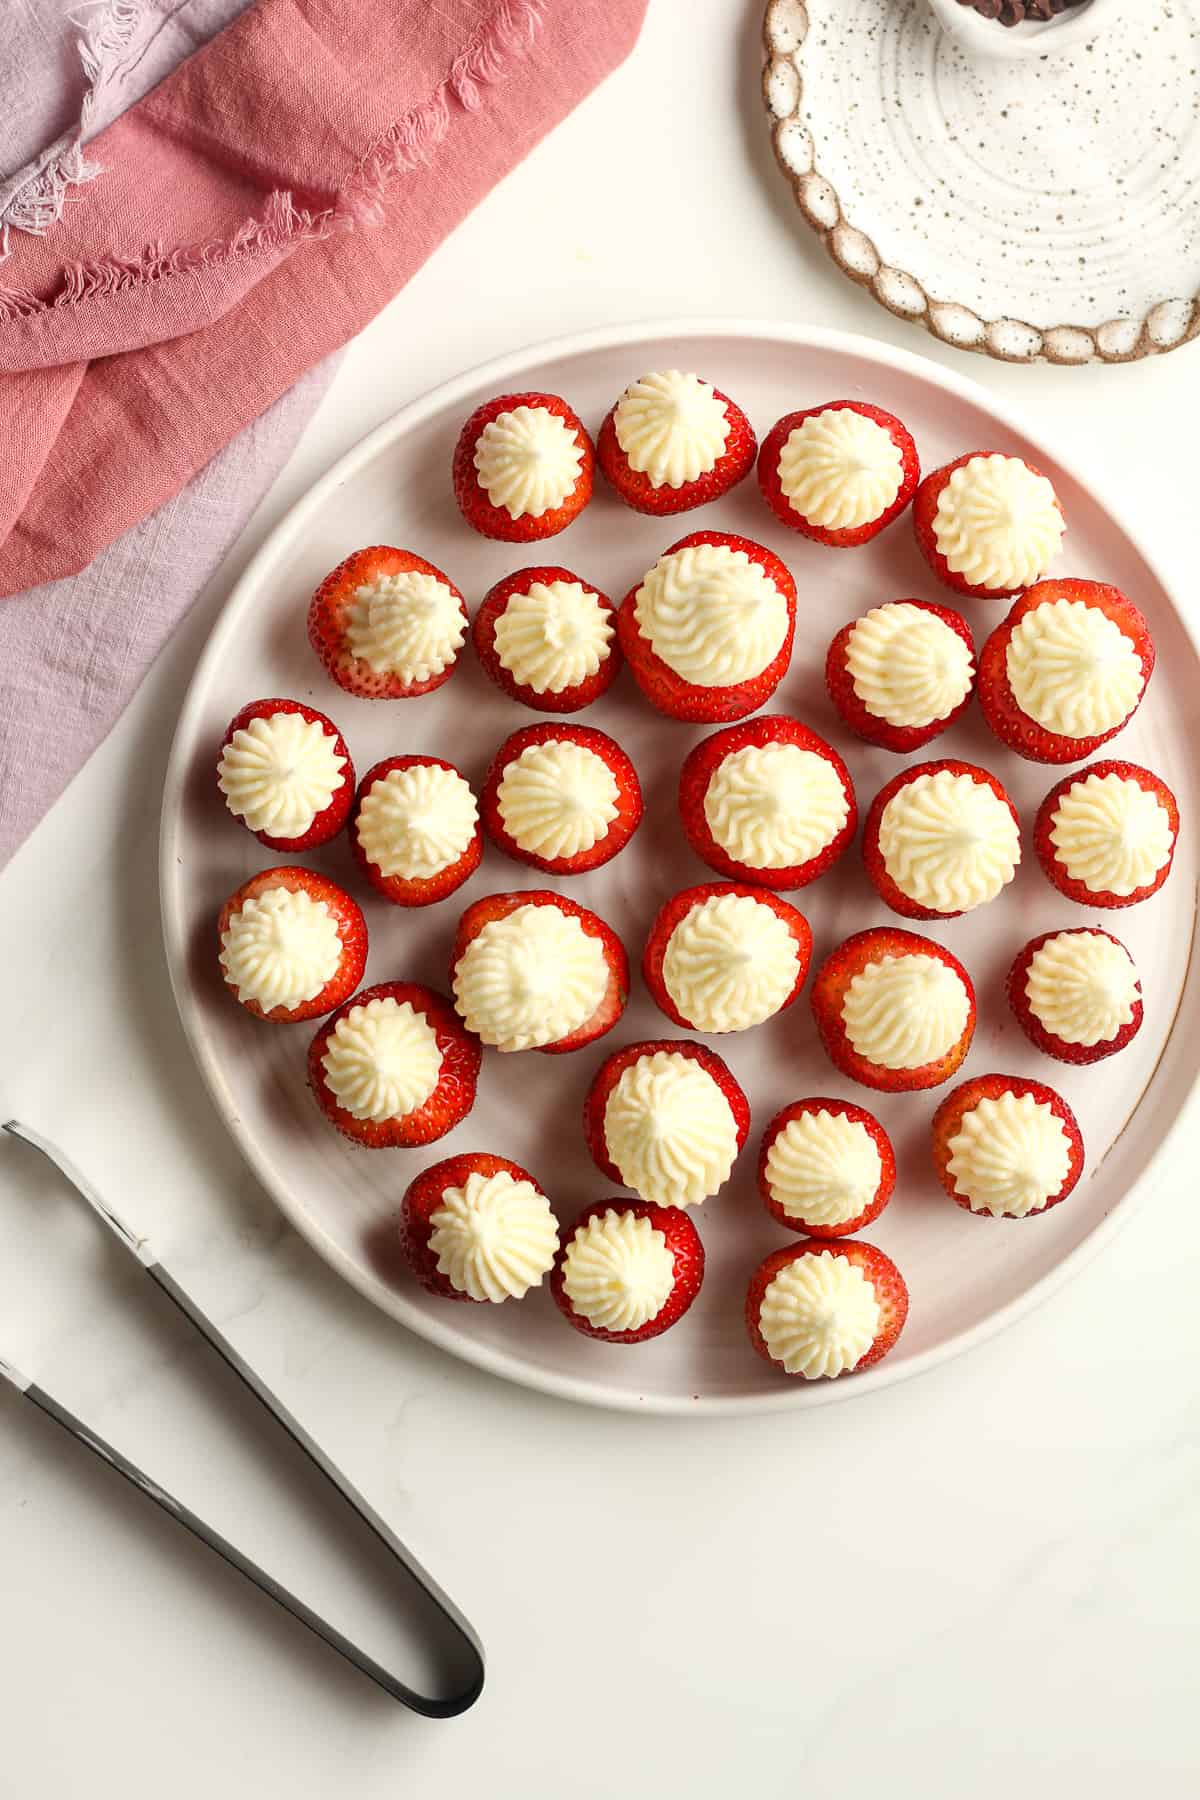 A white plate of the strawberry cheesecake bites.